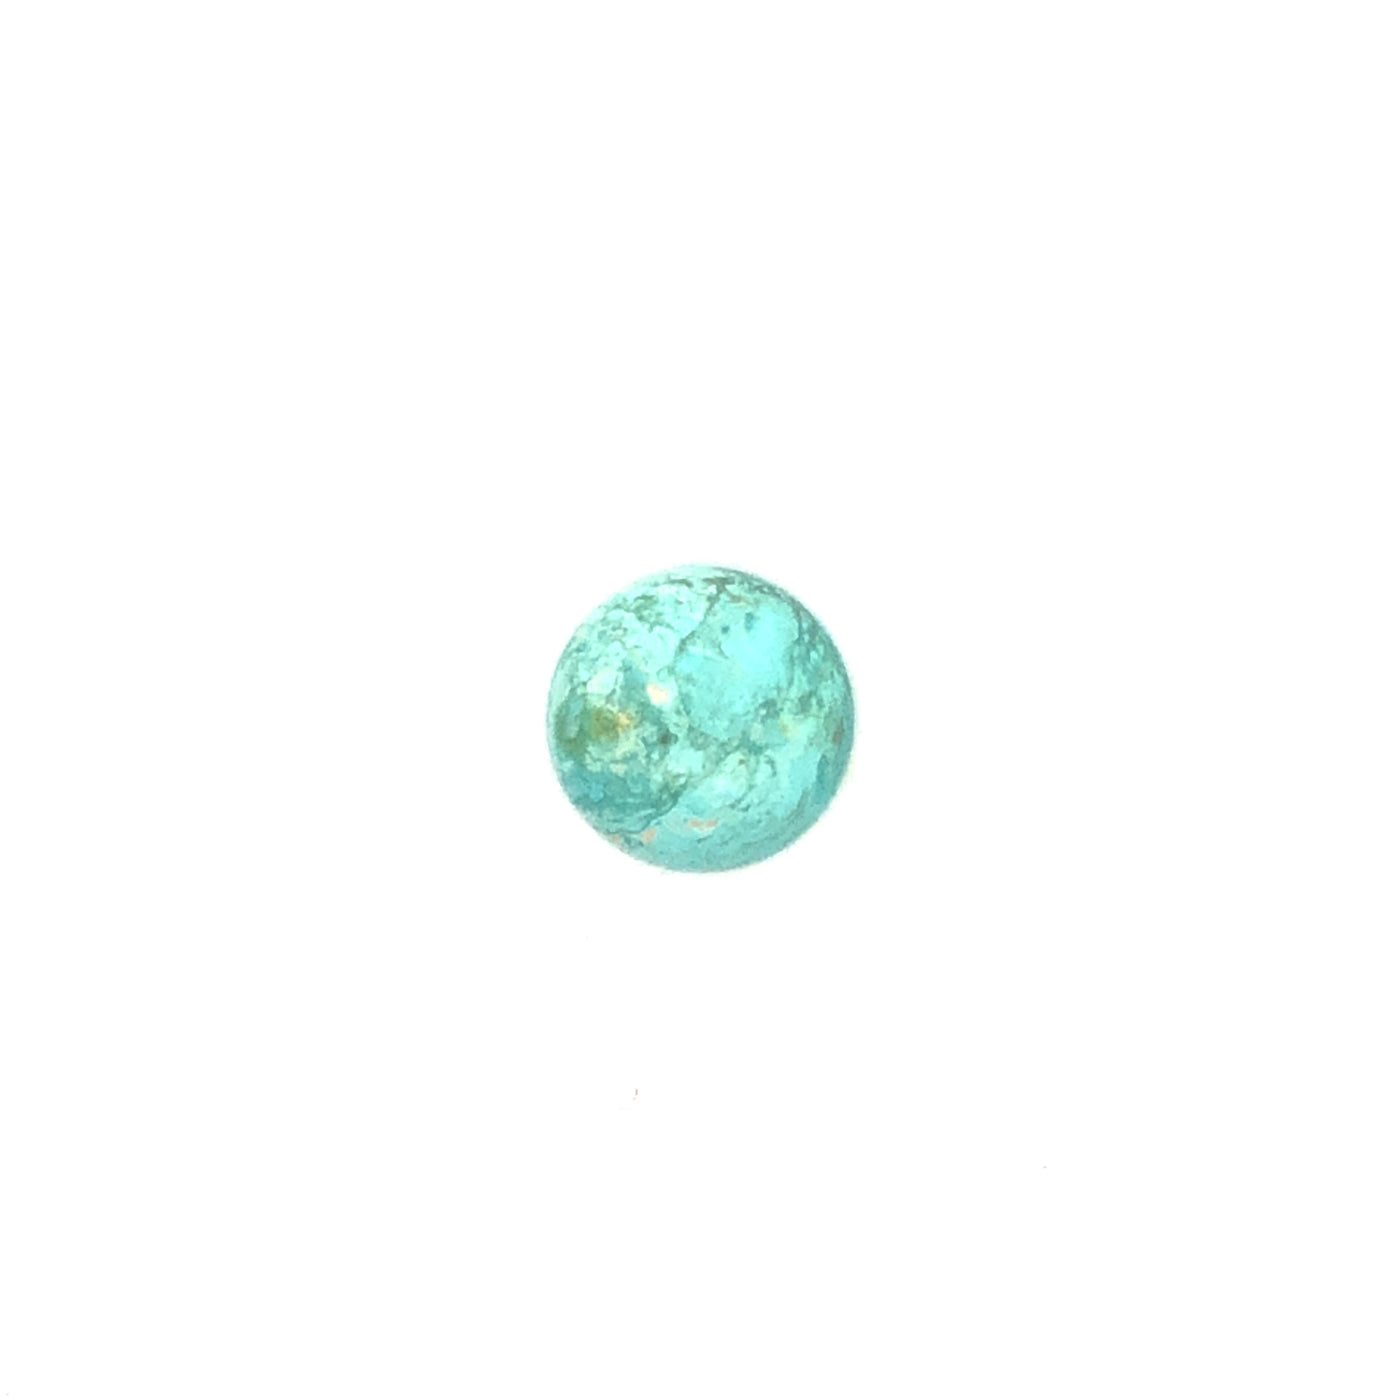 Loose Narooma Turquoise Round Shaped 6.21Ct Blue